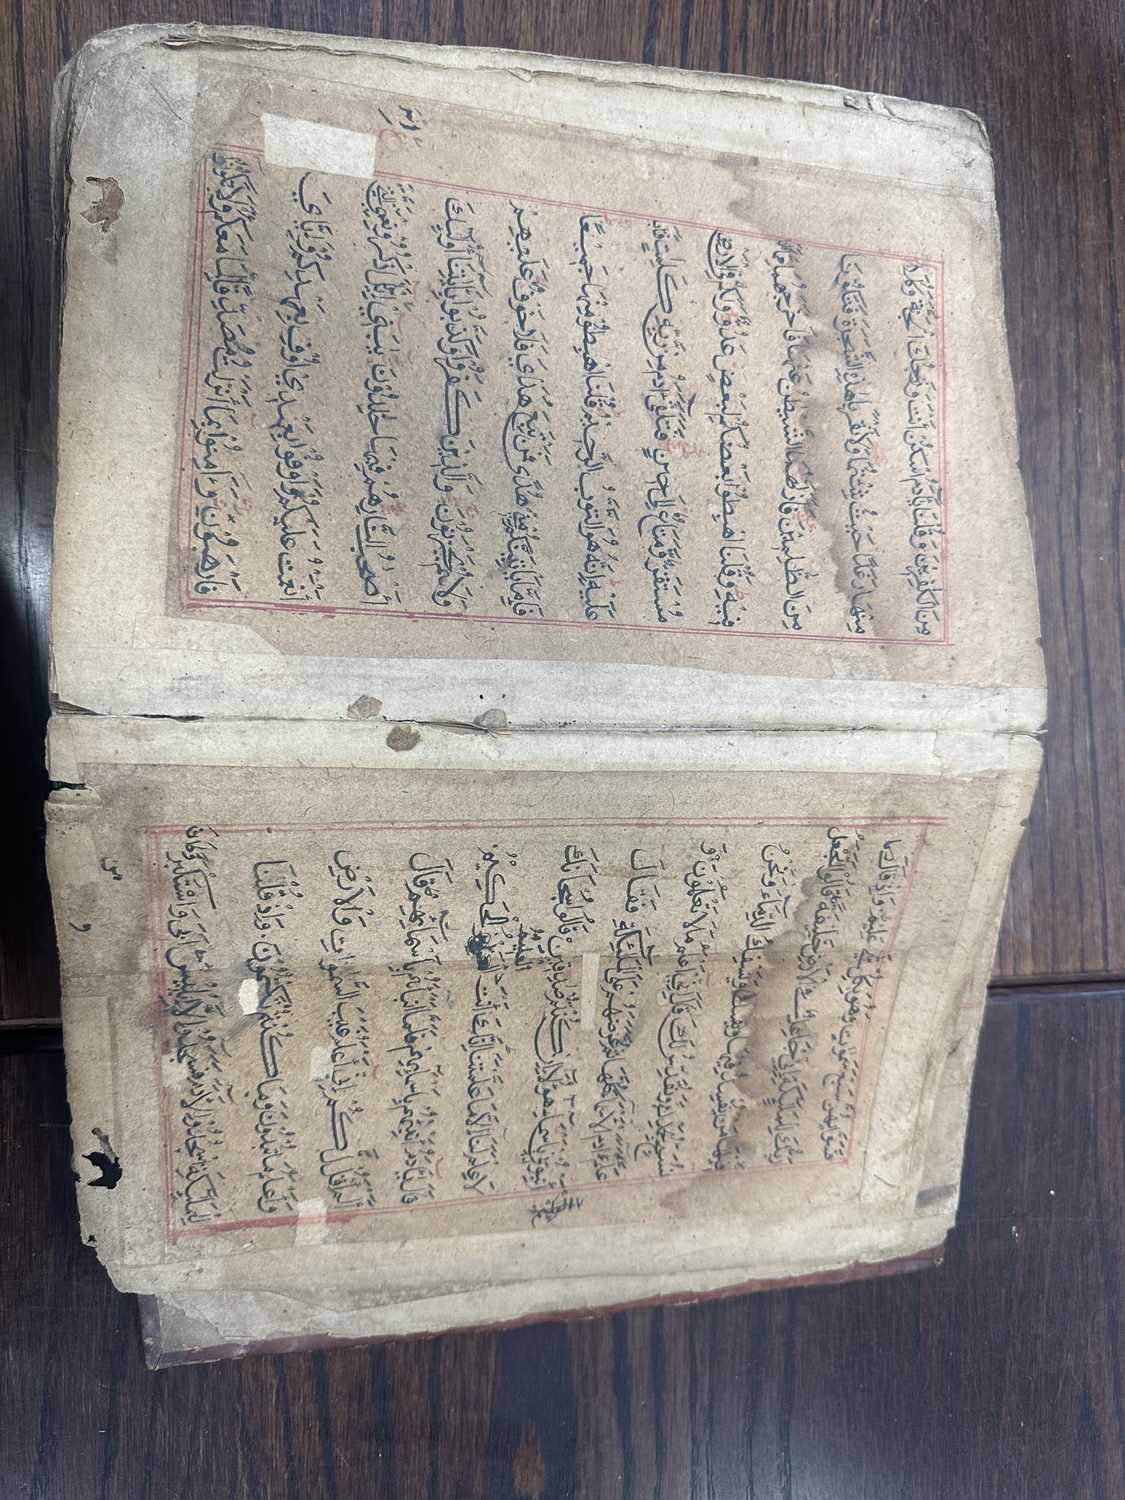 AN EARLY COPY OF THE KORAN LEATHER BOUND BOOK - Image 44 of 44